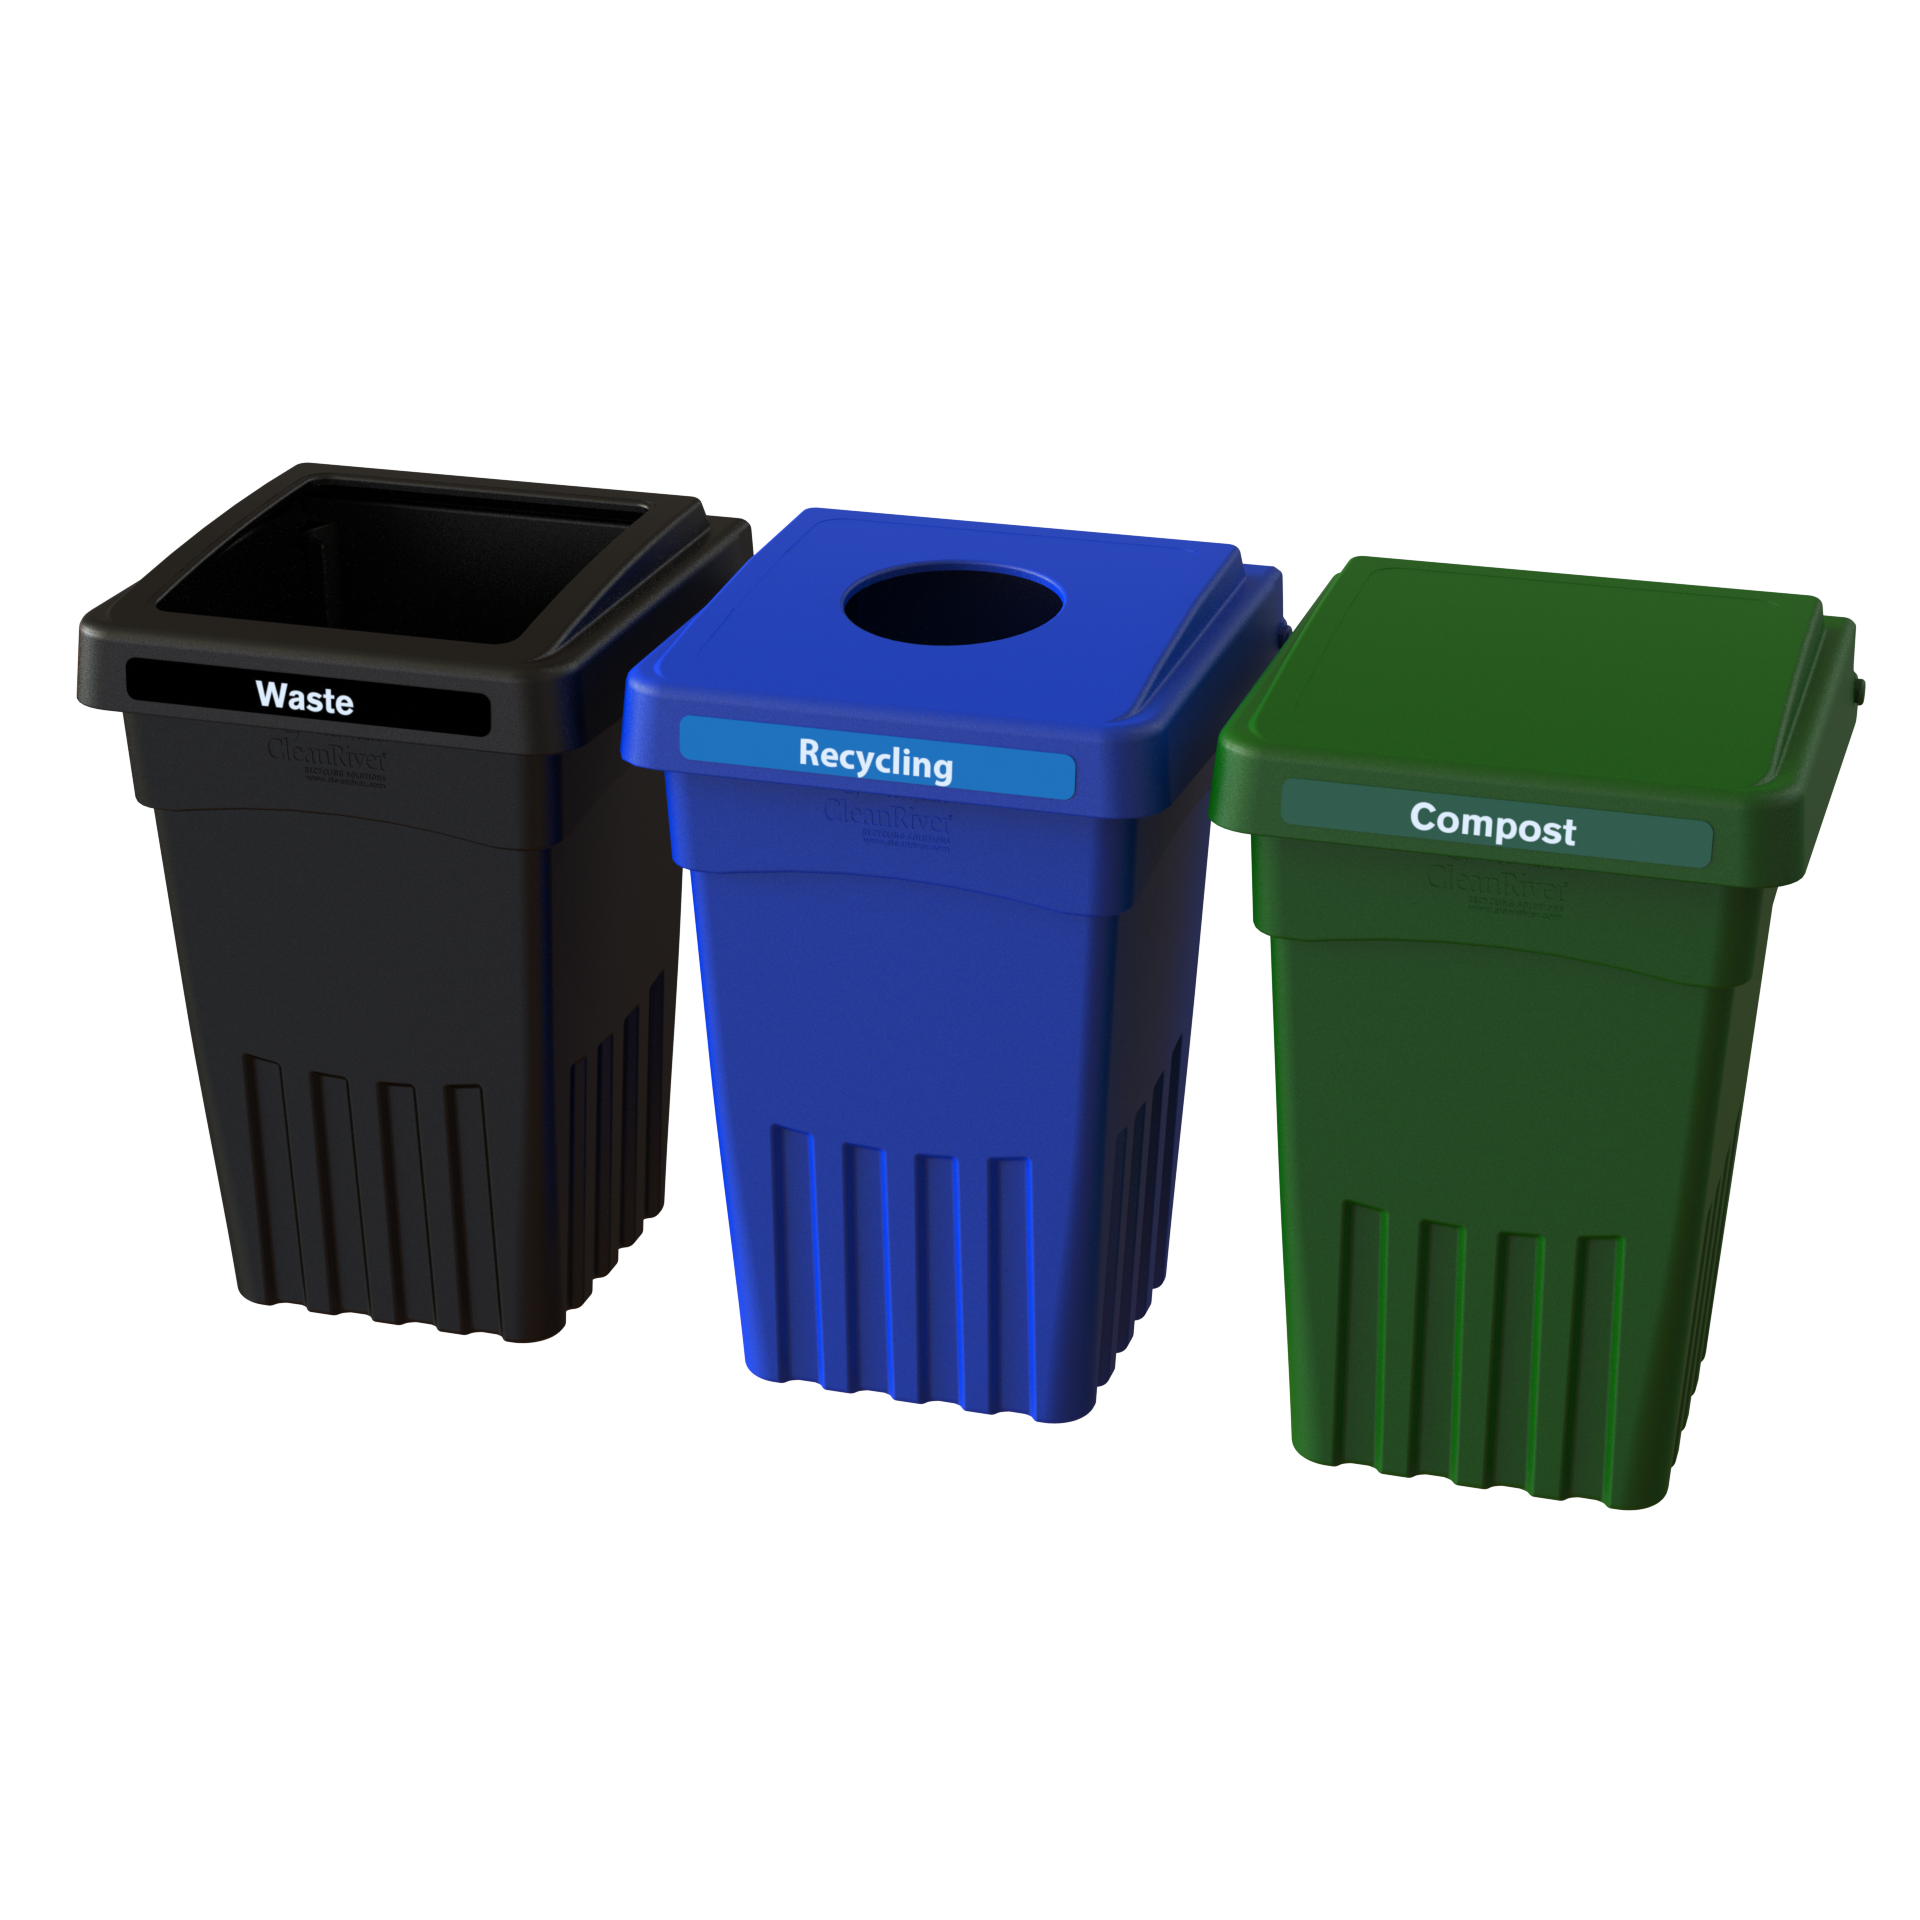 BevvyBin 8 3 Pack with Waste, Recycling and Compost.